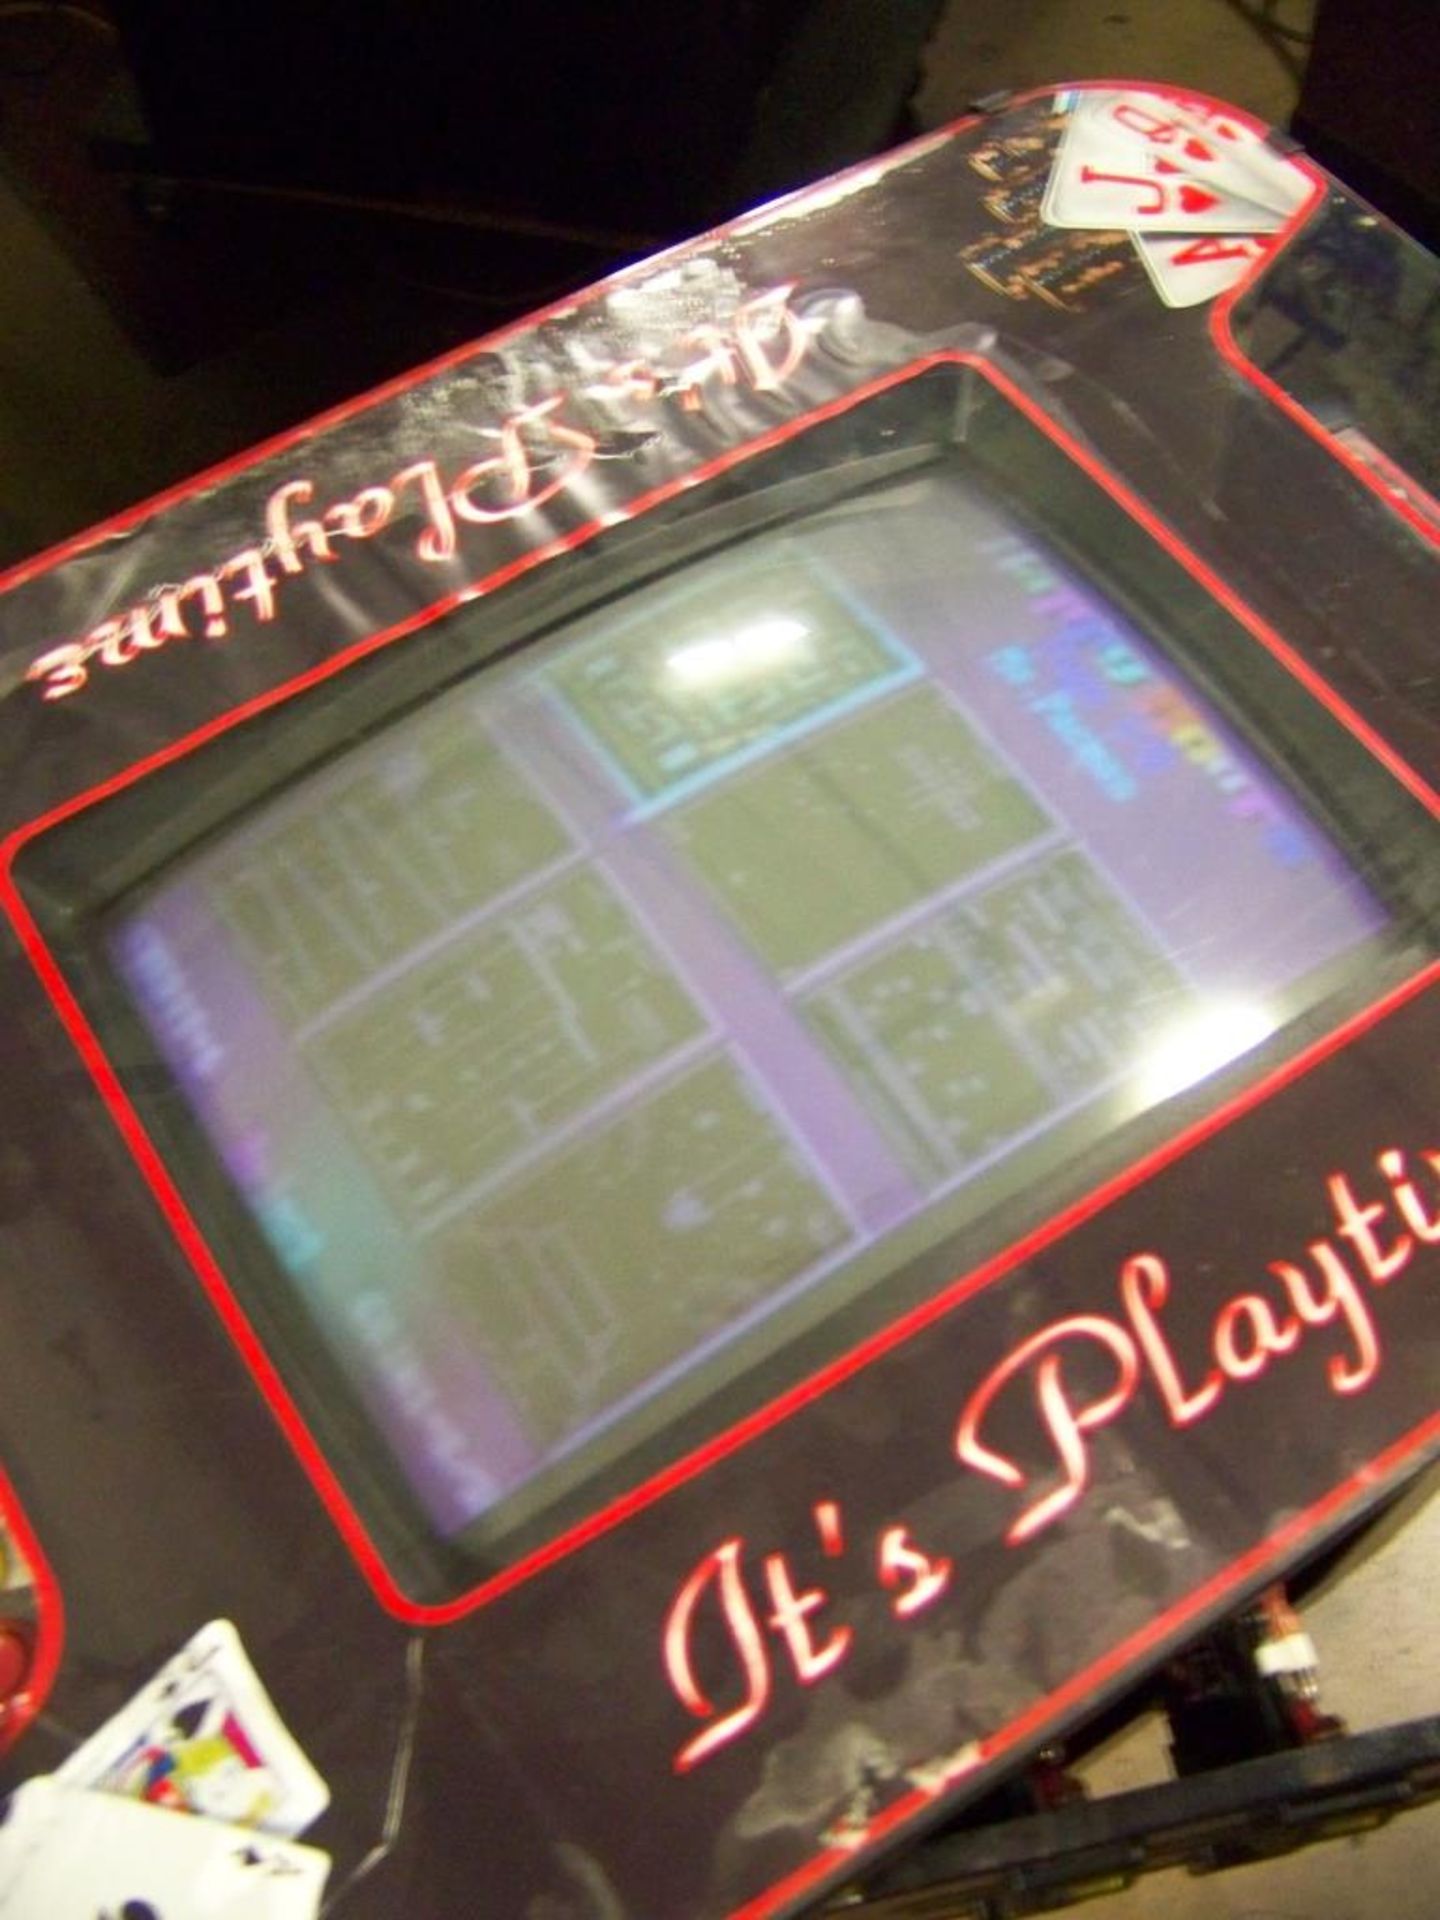 60 IN 1 MULTICADE TABLE ARCADE GAME - Image 3 of 3